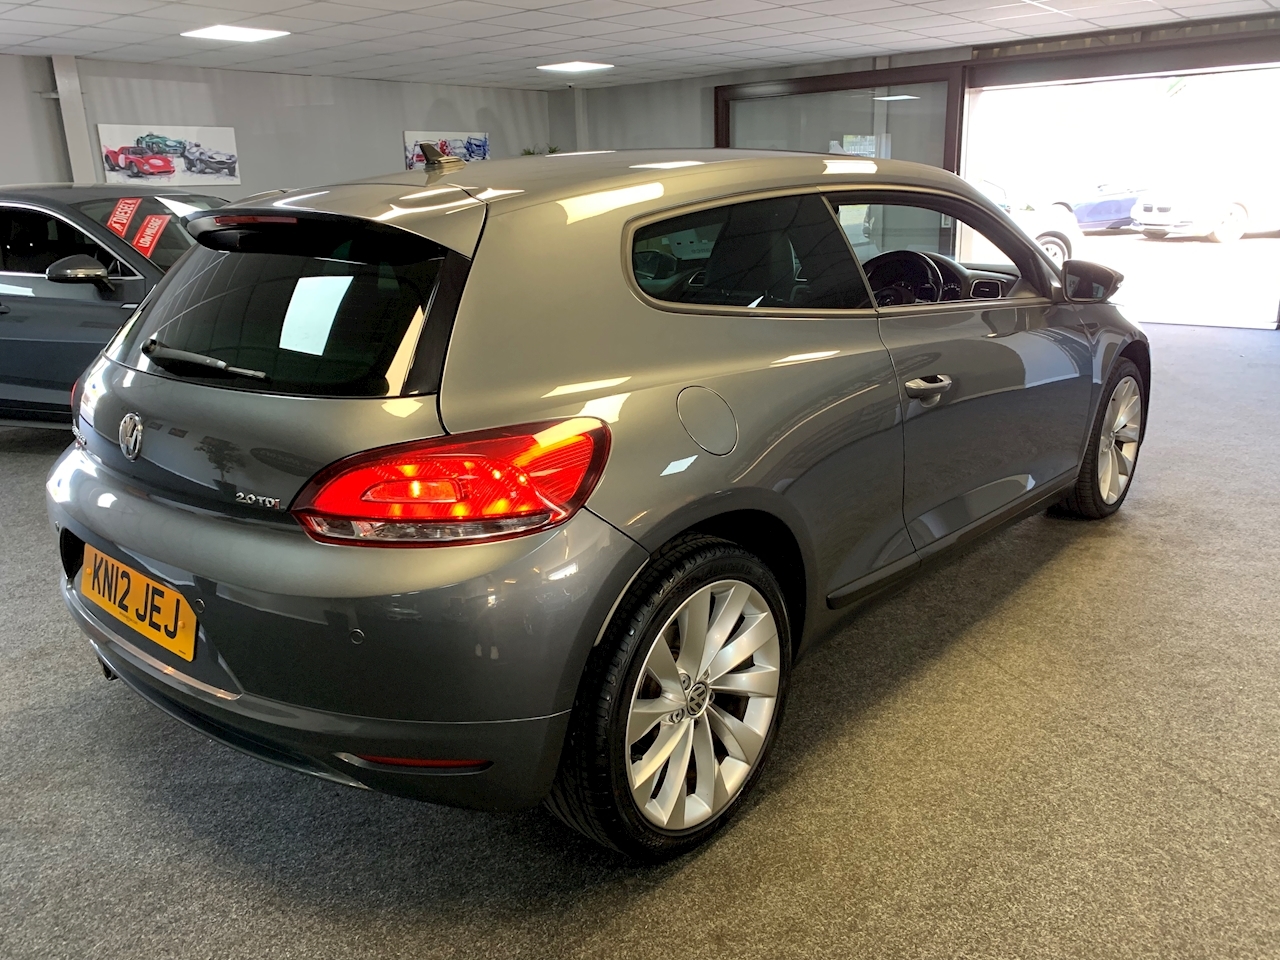 Scirocco Gt Tdi Coupe 2.0 Manual Diesel